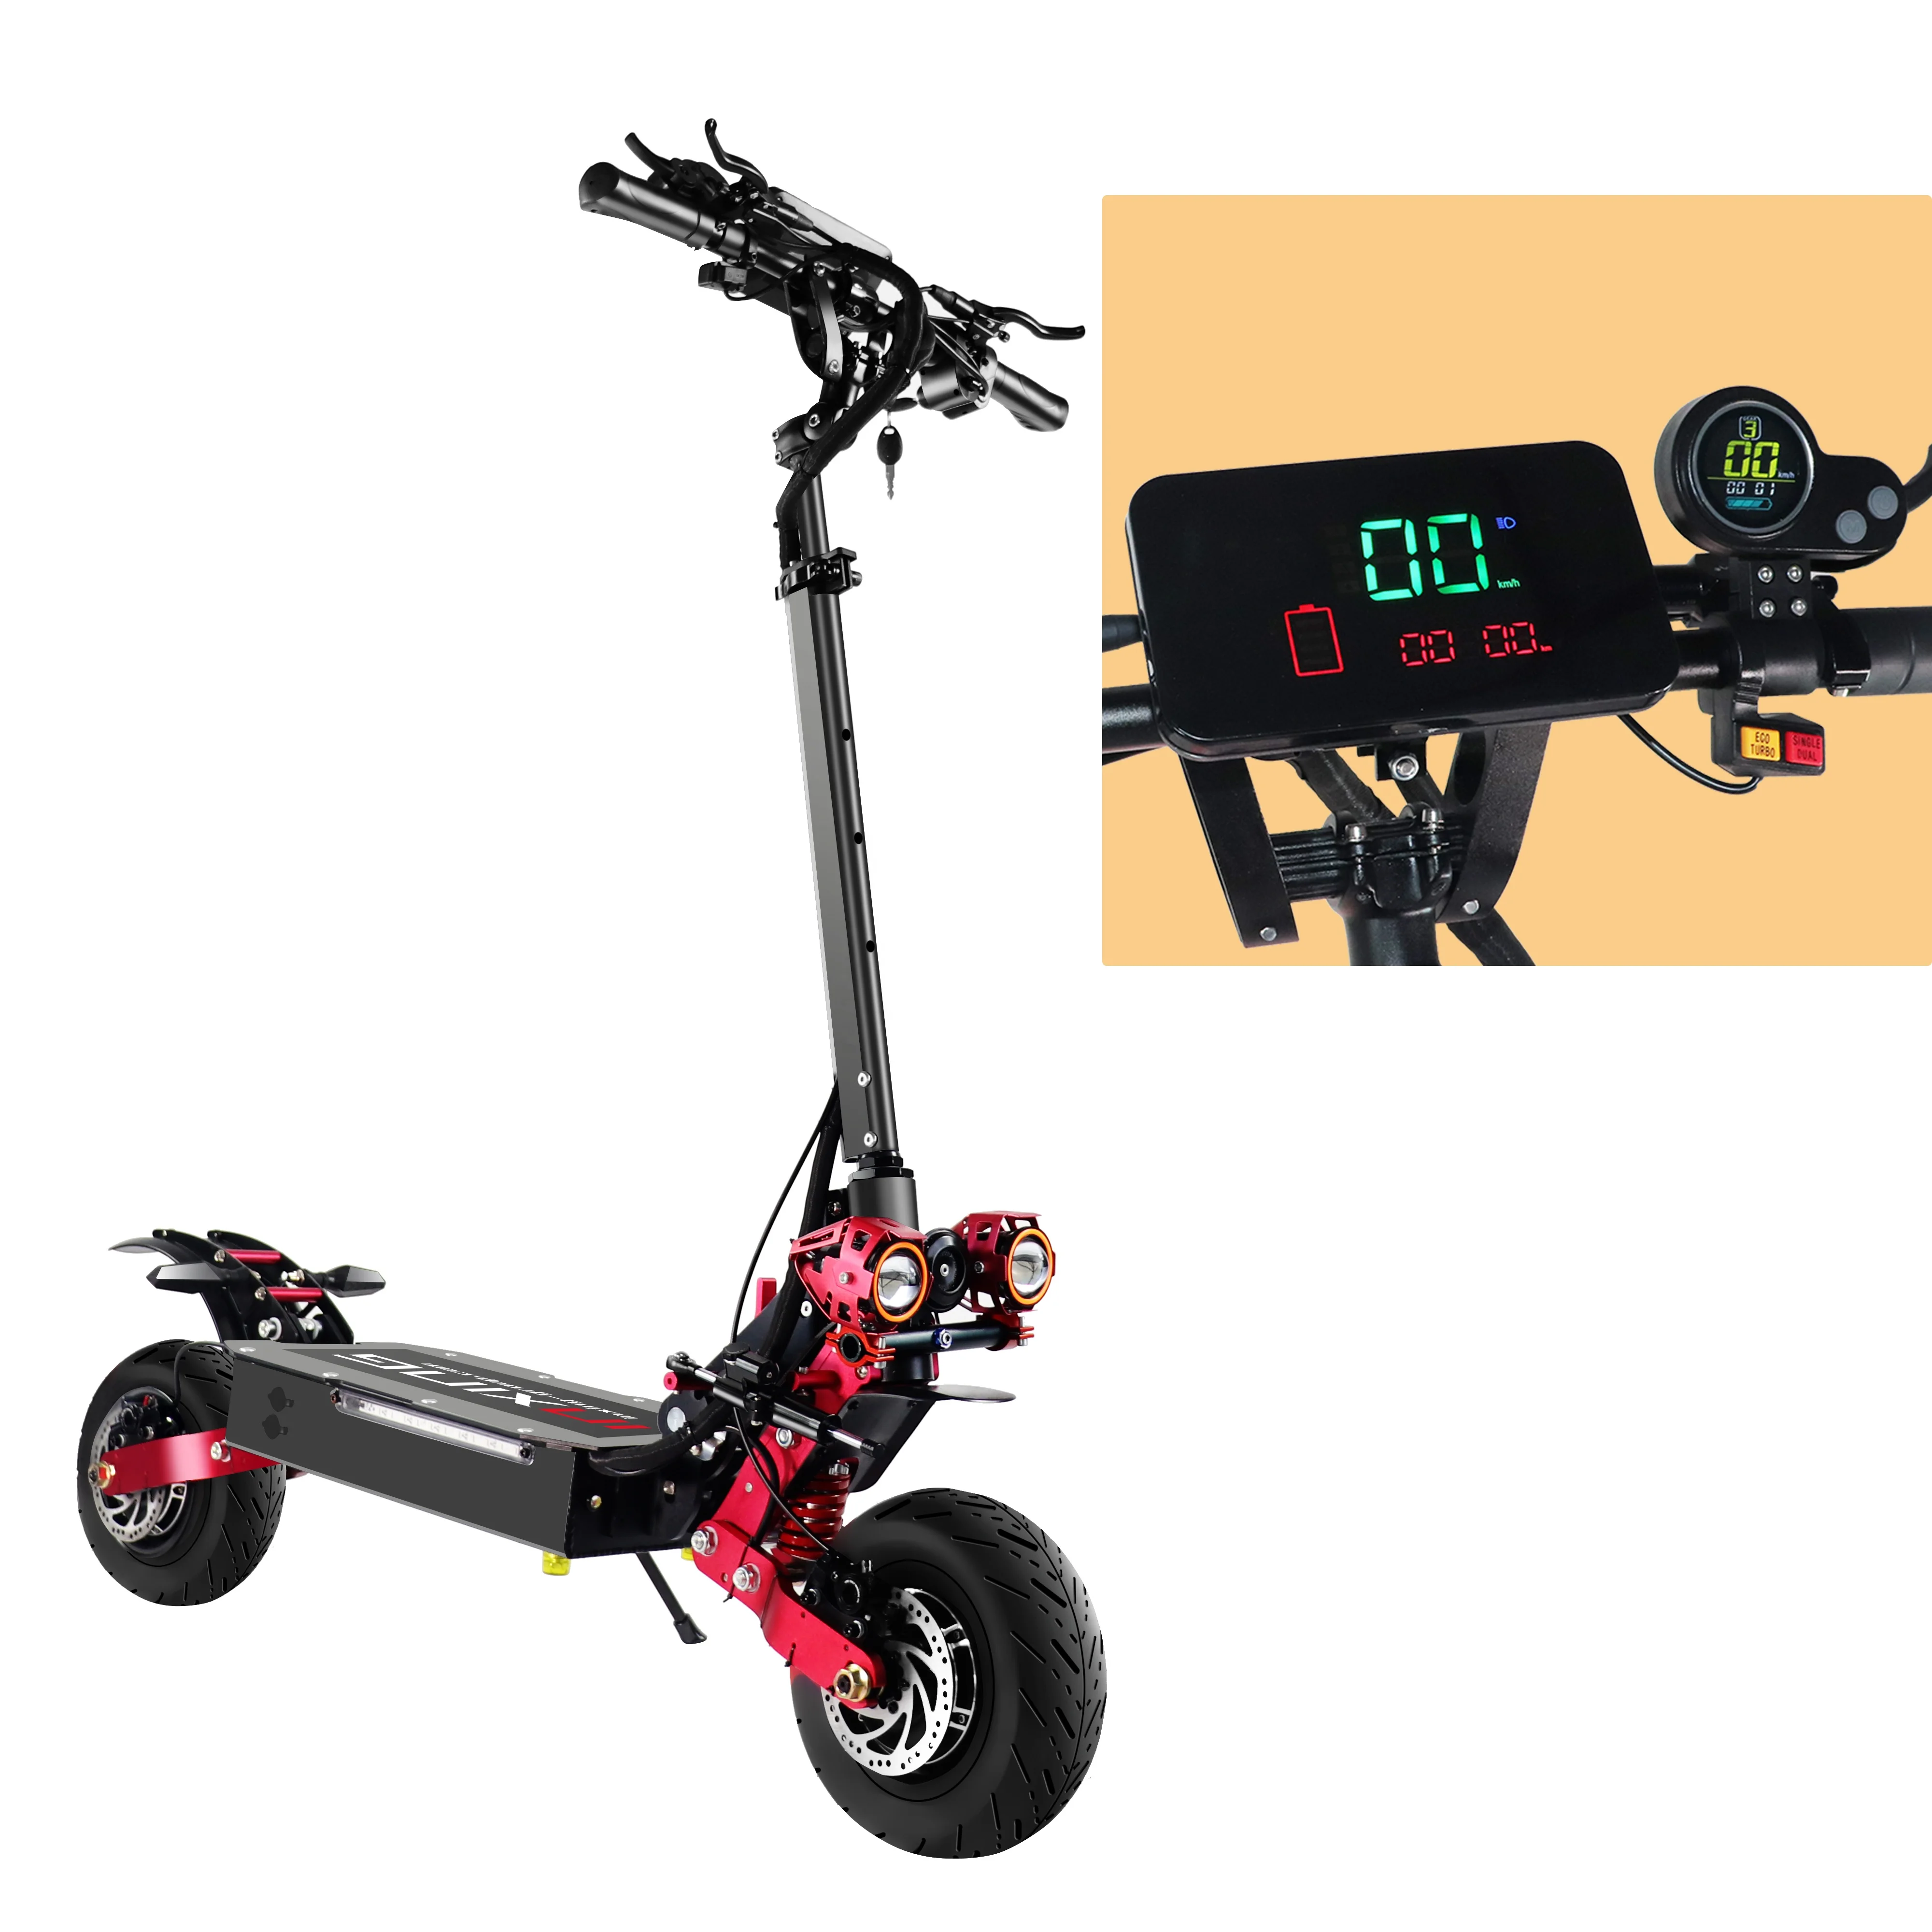 60v 3200w motorcycle lithium battery fat tire electric scooter, Black